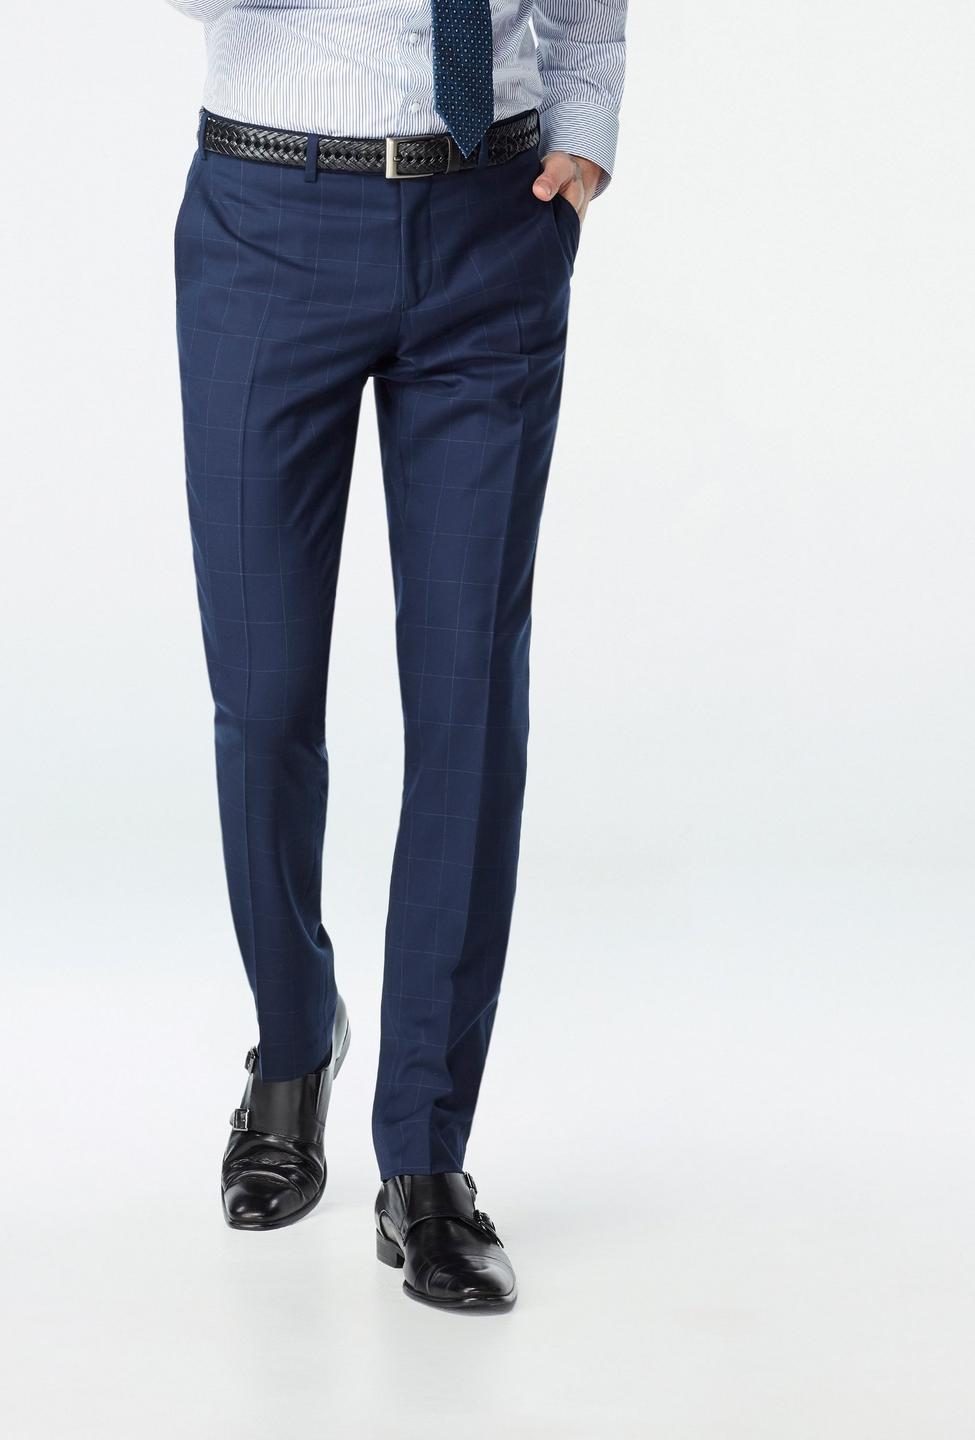 Blue pants - Harrogate Checked Design from Luxury Indochino Collection